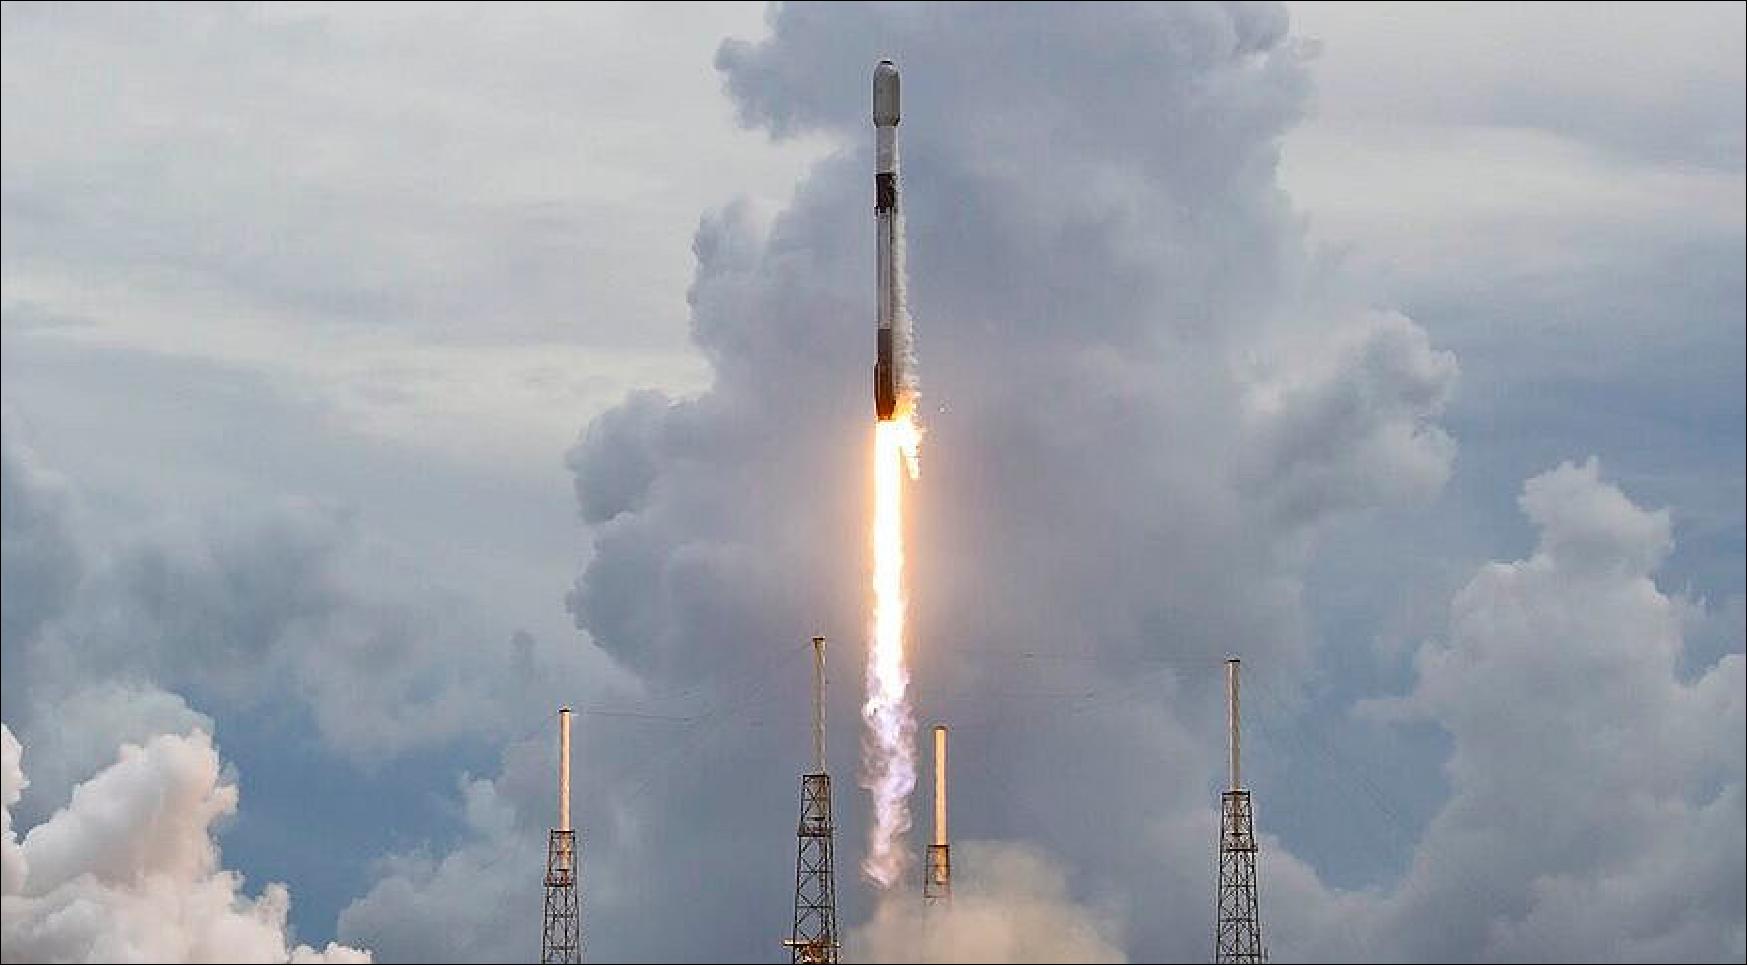 Figure 4: The June 30 Falcon 9 launch of the Transporter-2 mission was the first launch to use the FAA's Space Data Integrator, a tool intended to reduce the time airspace is closed for launches (image credit: SpaceX)